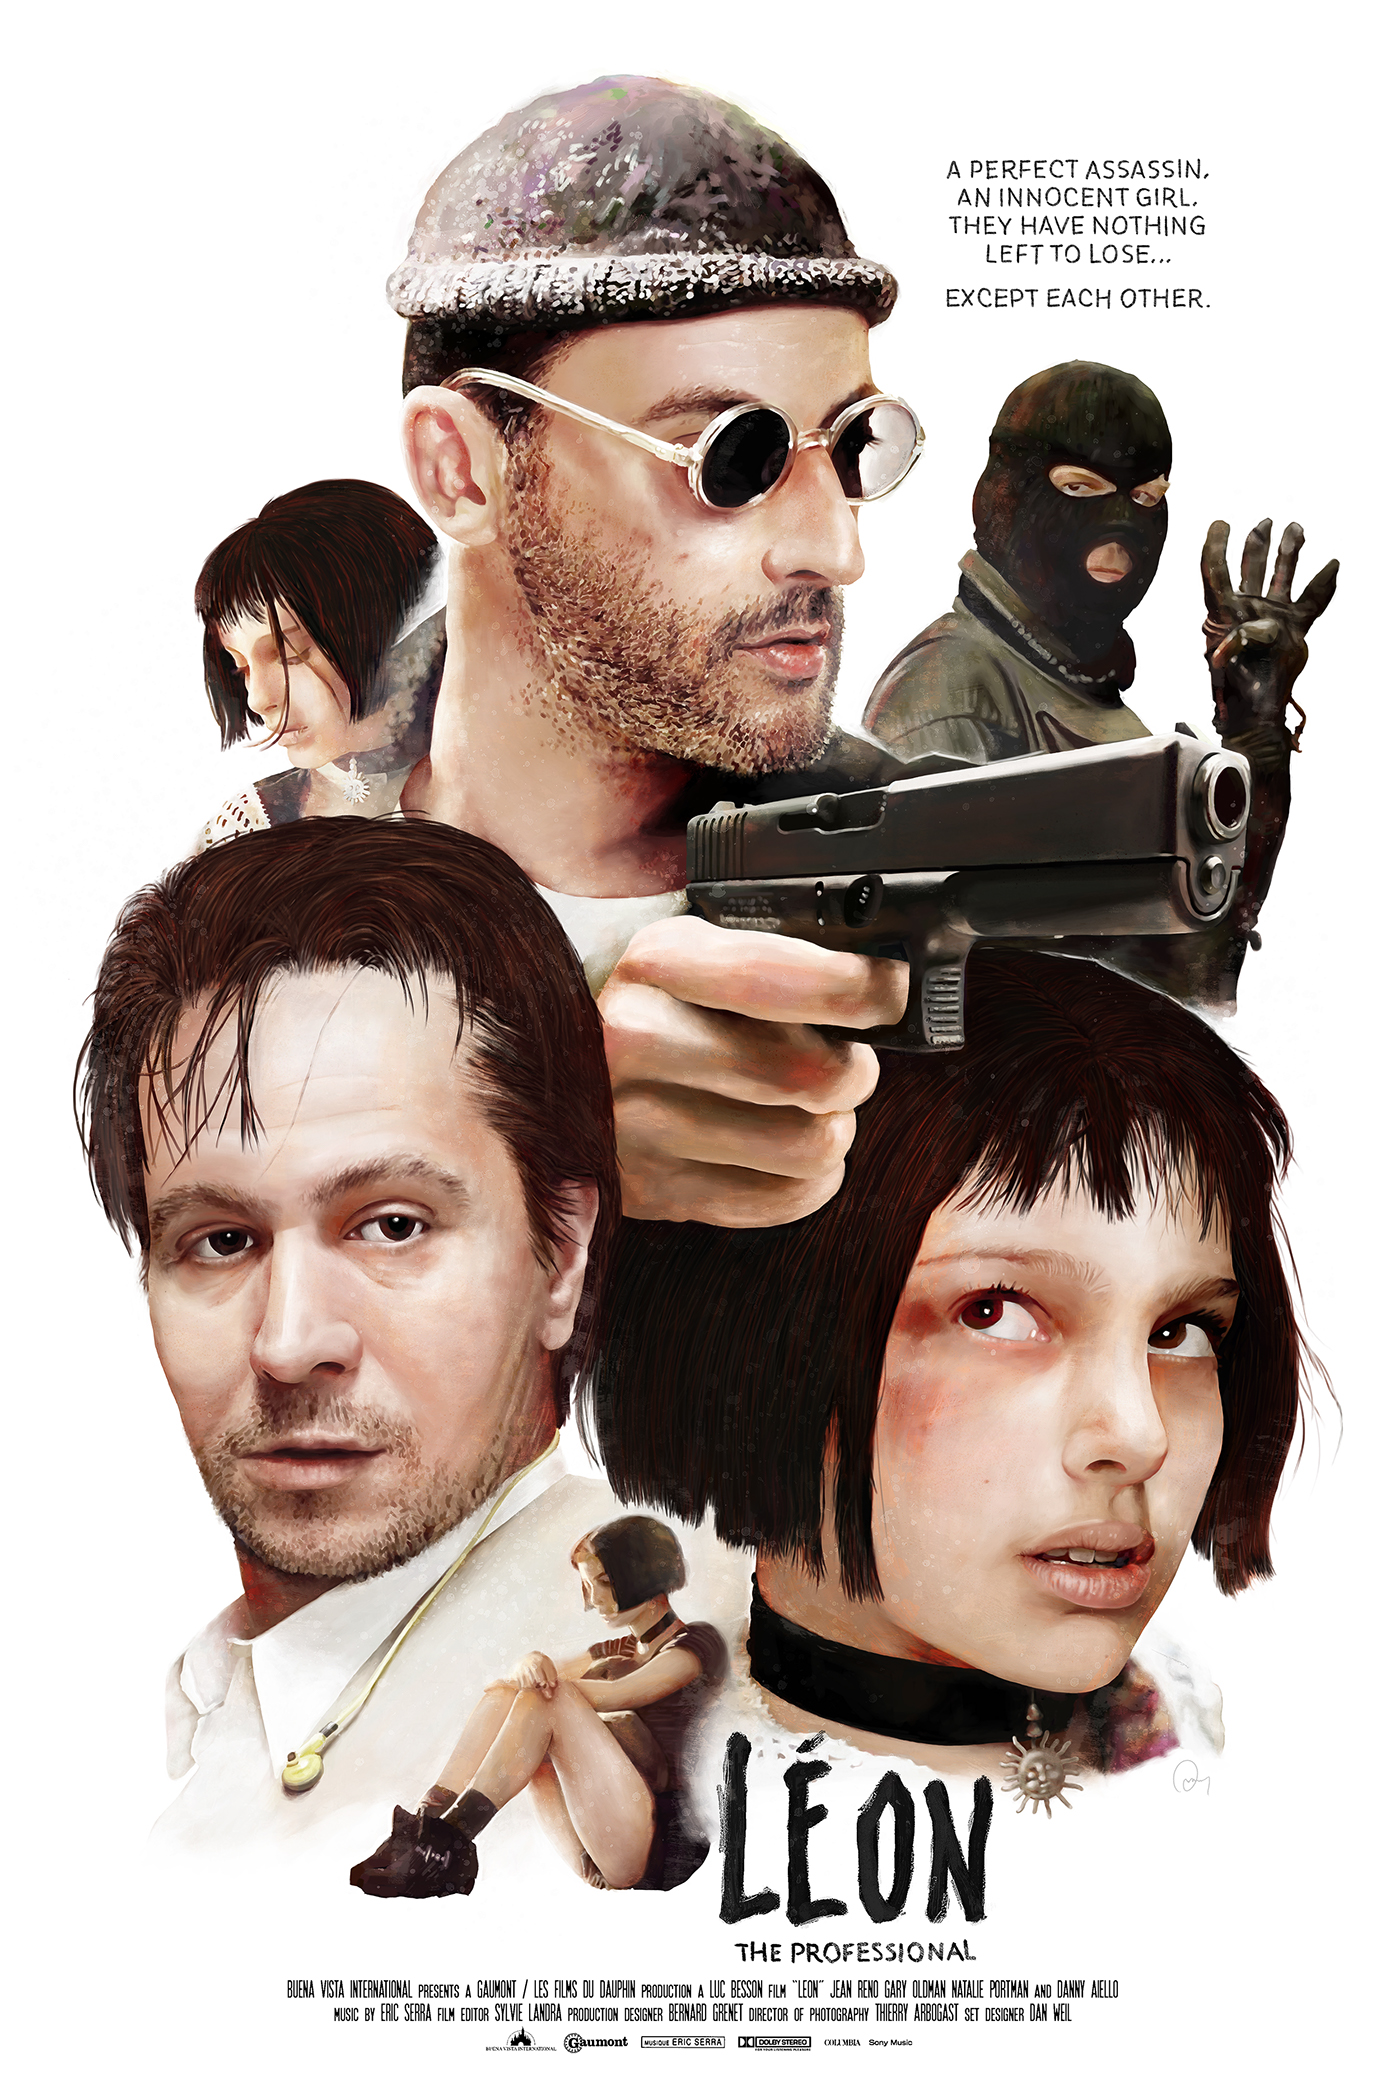 Poster illustration for The Professional, Leon by Luc Besson ft. Jean Reno and Natalie Portman.